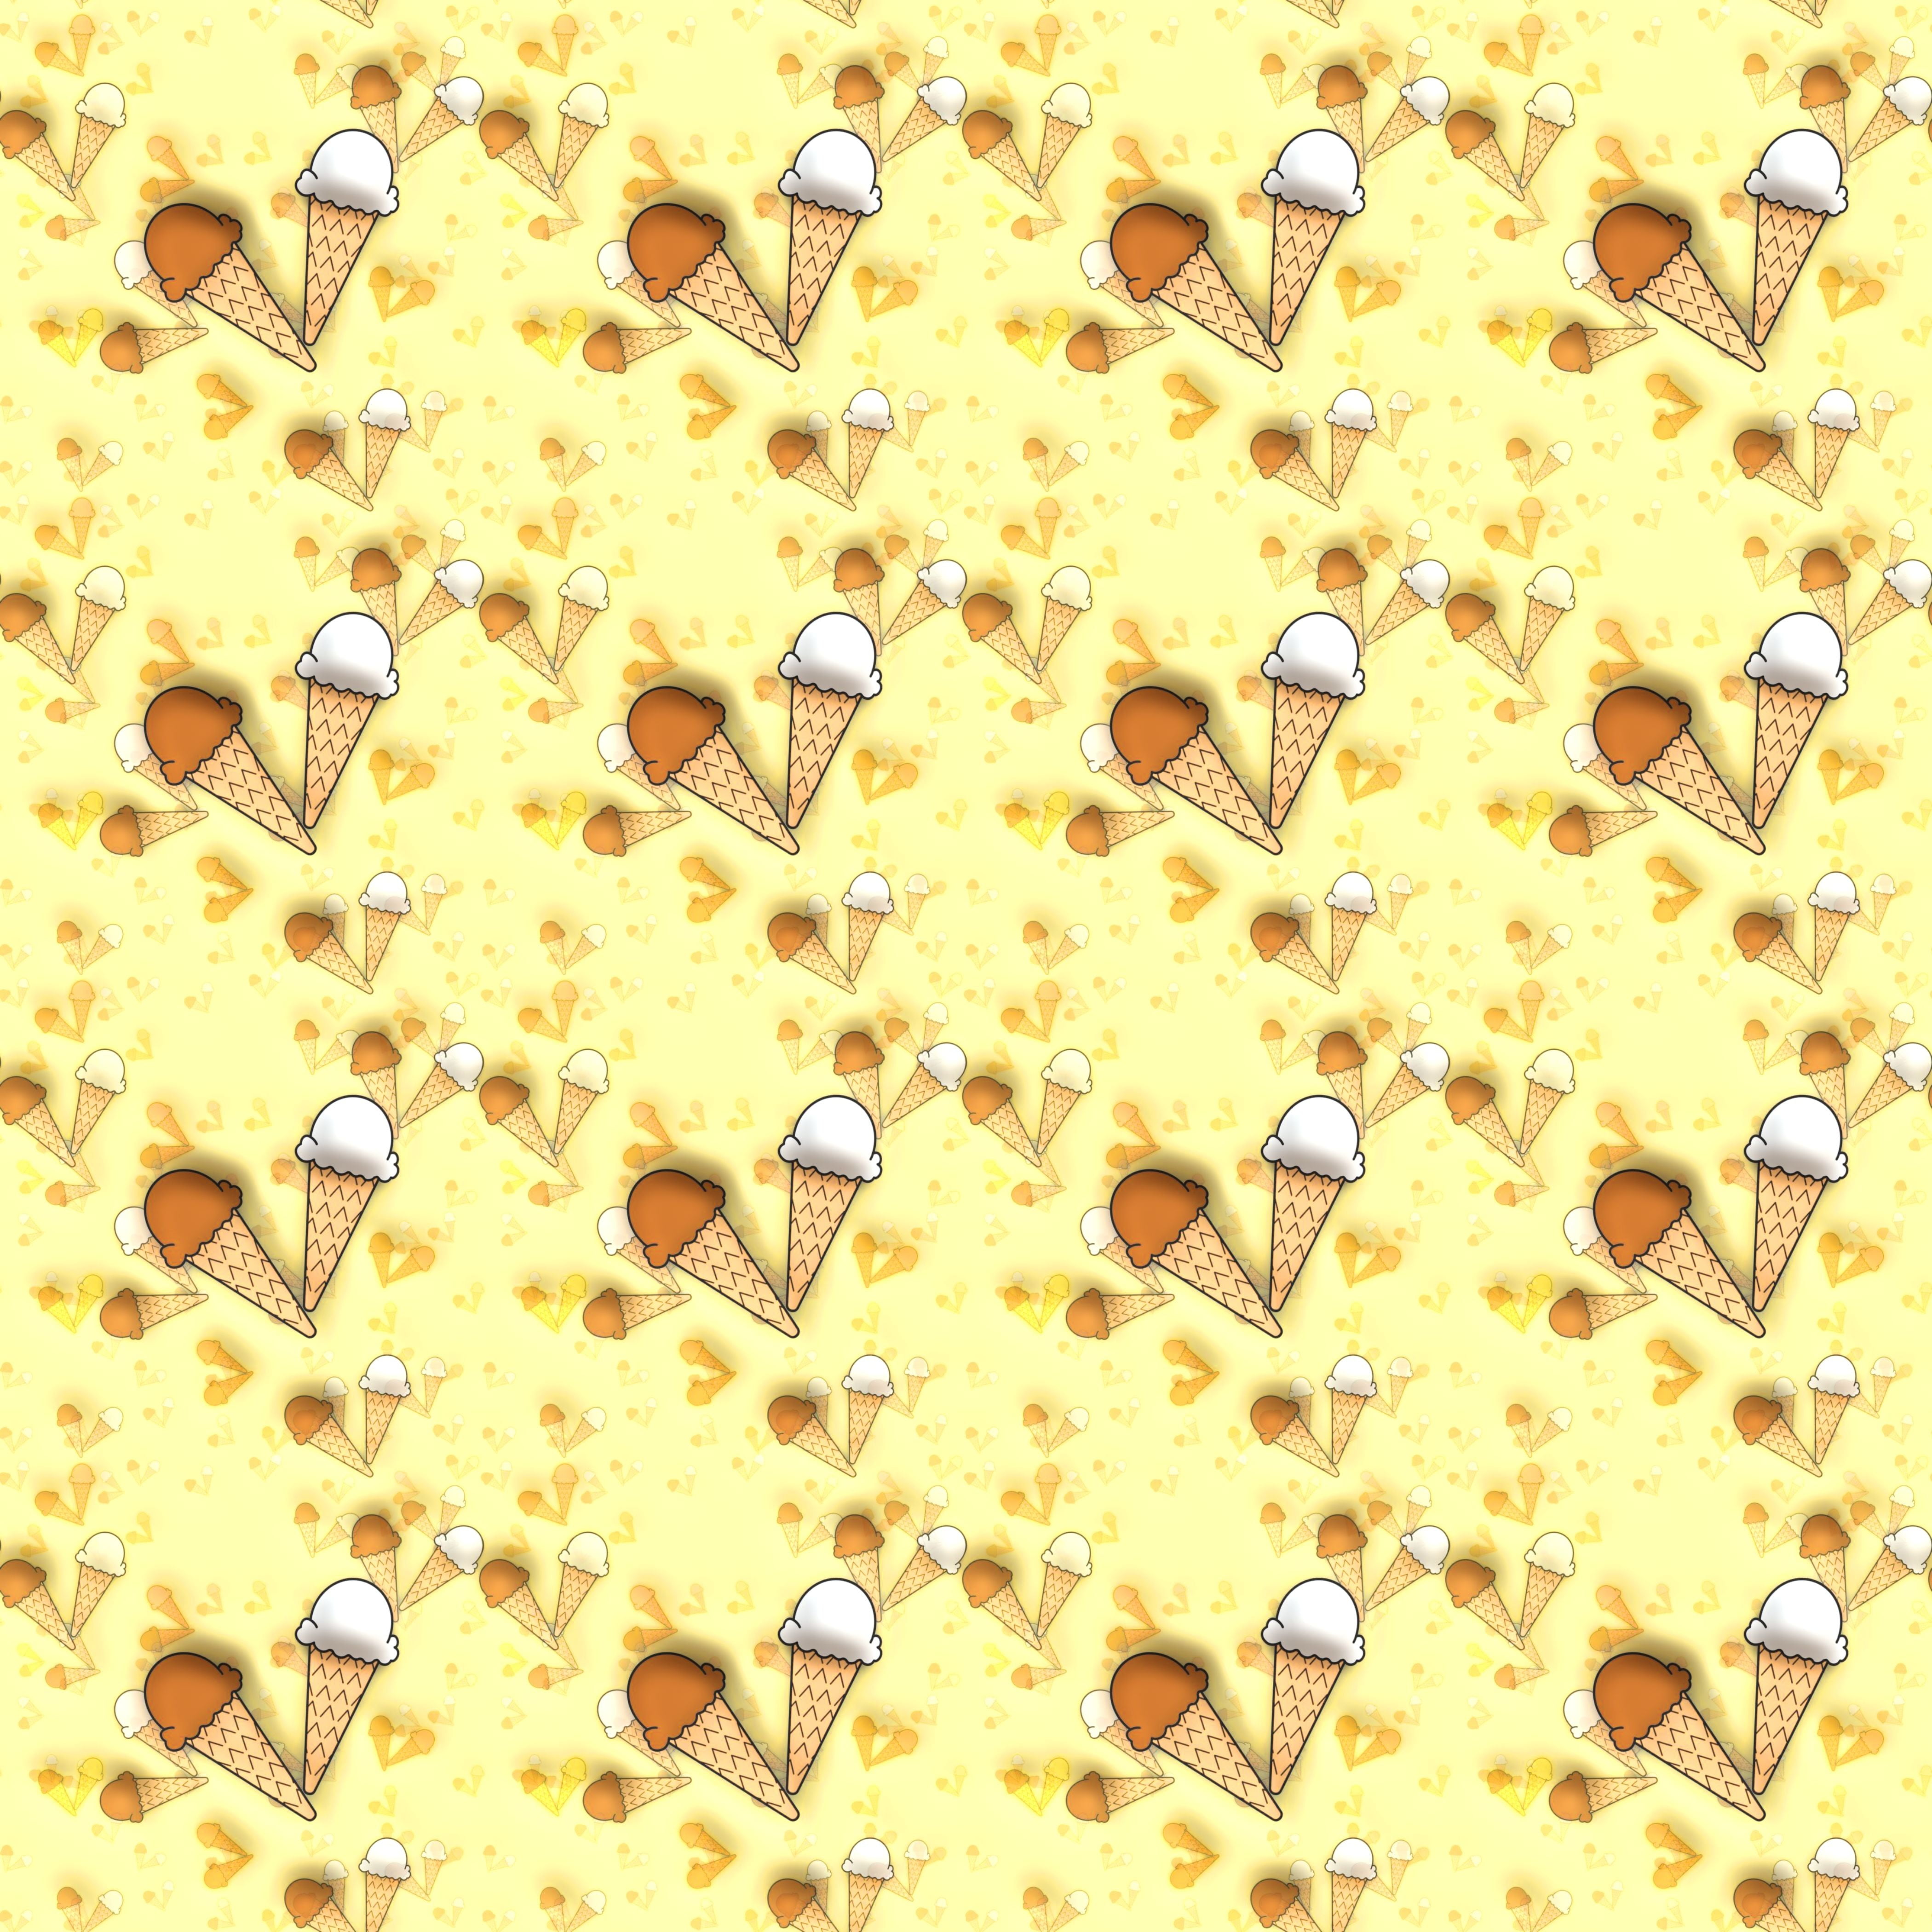 pattern, texture, ice cream, yellow, full frame, backgrounds